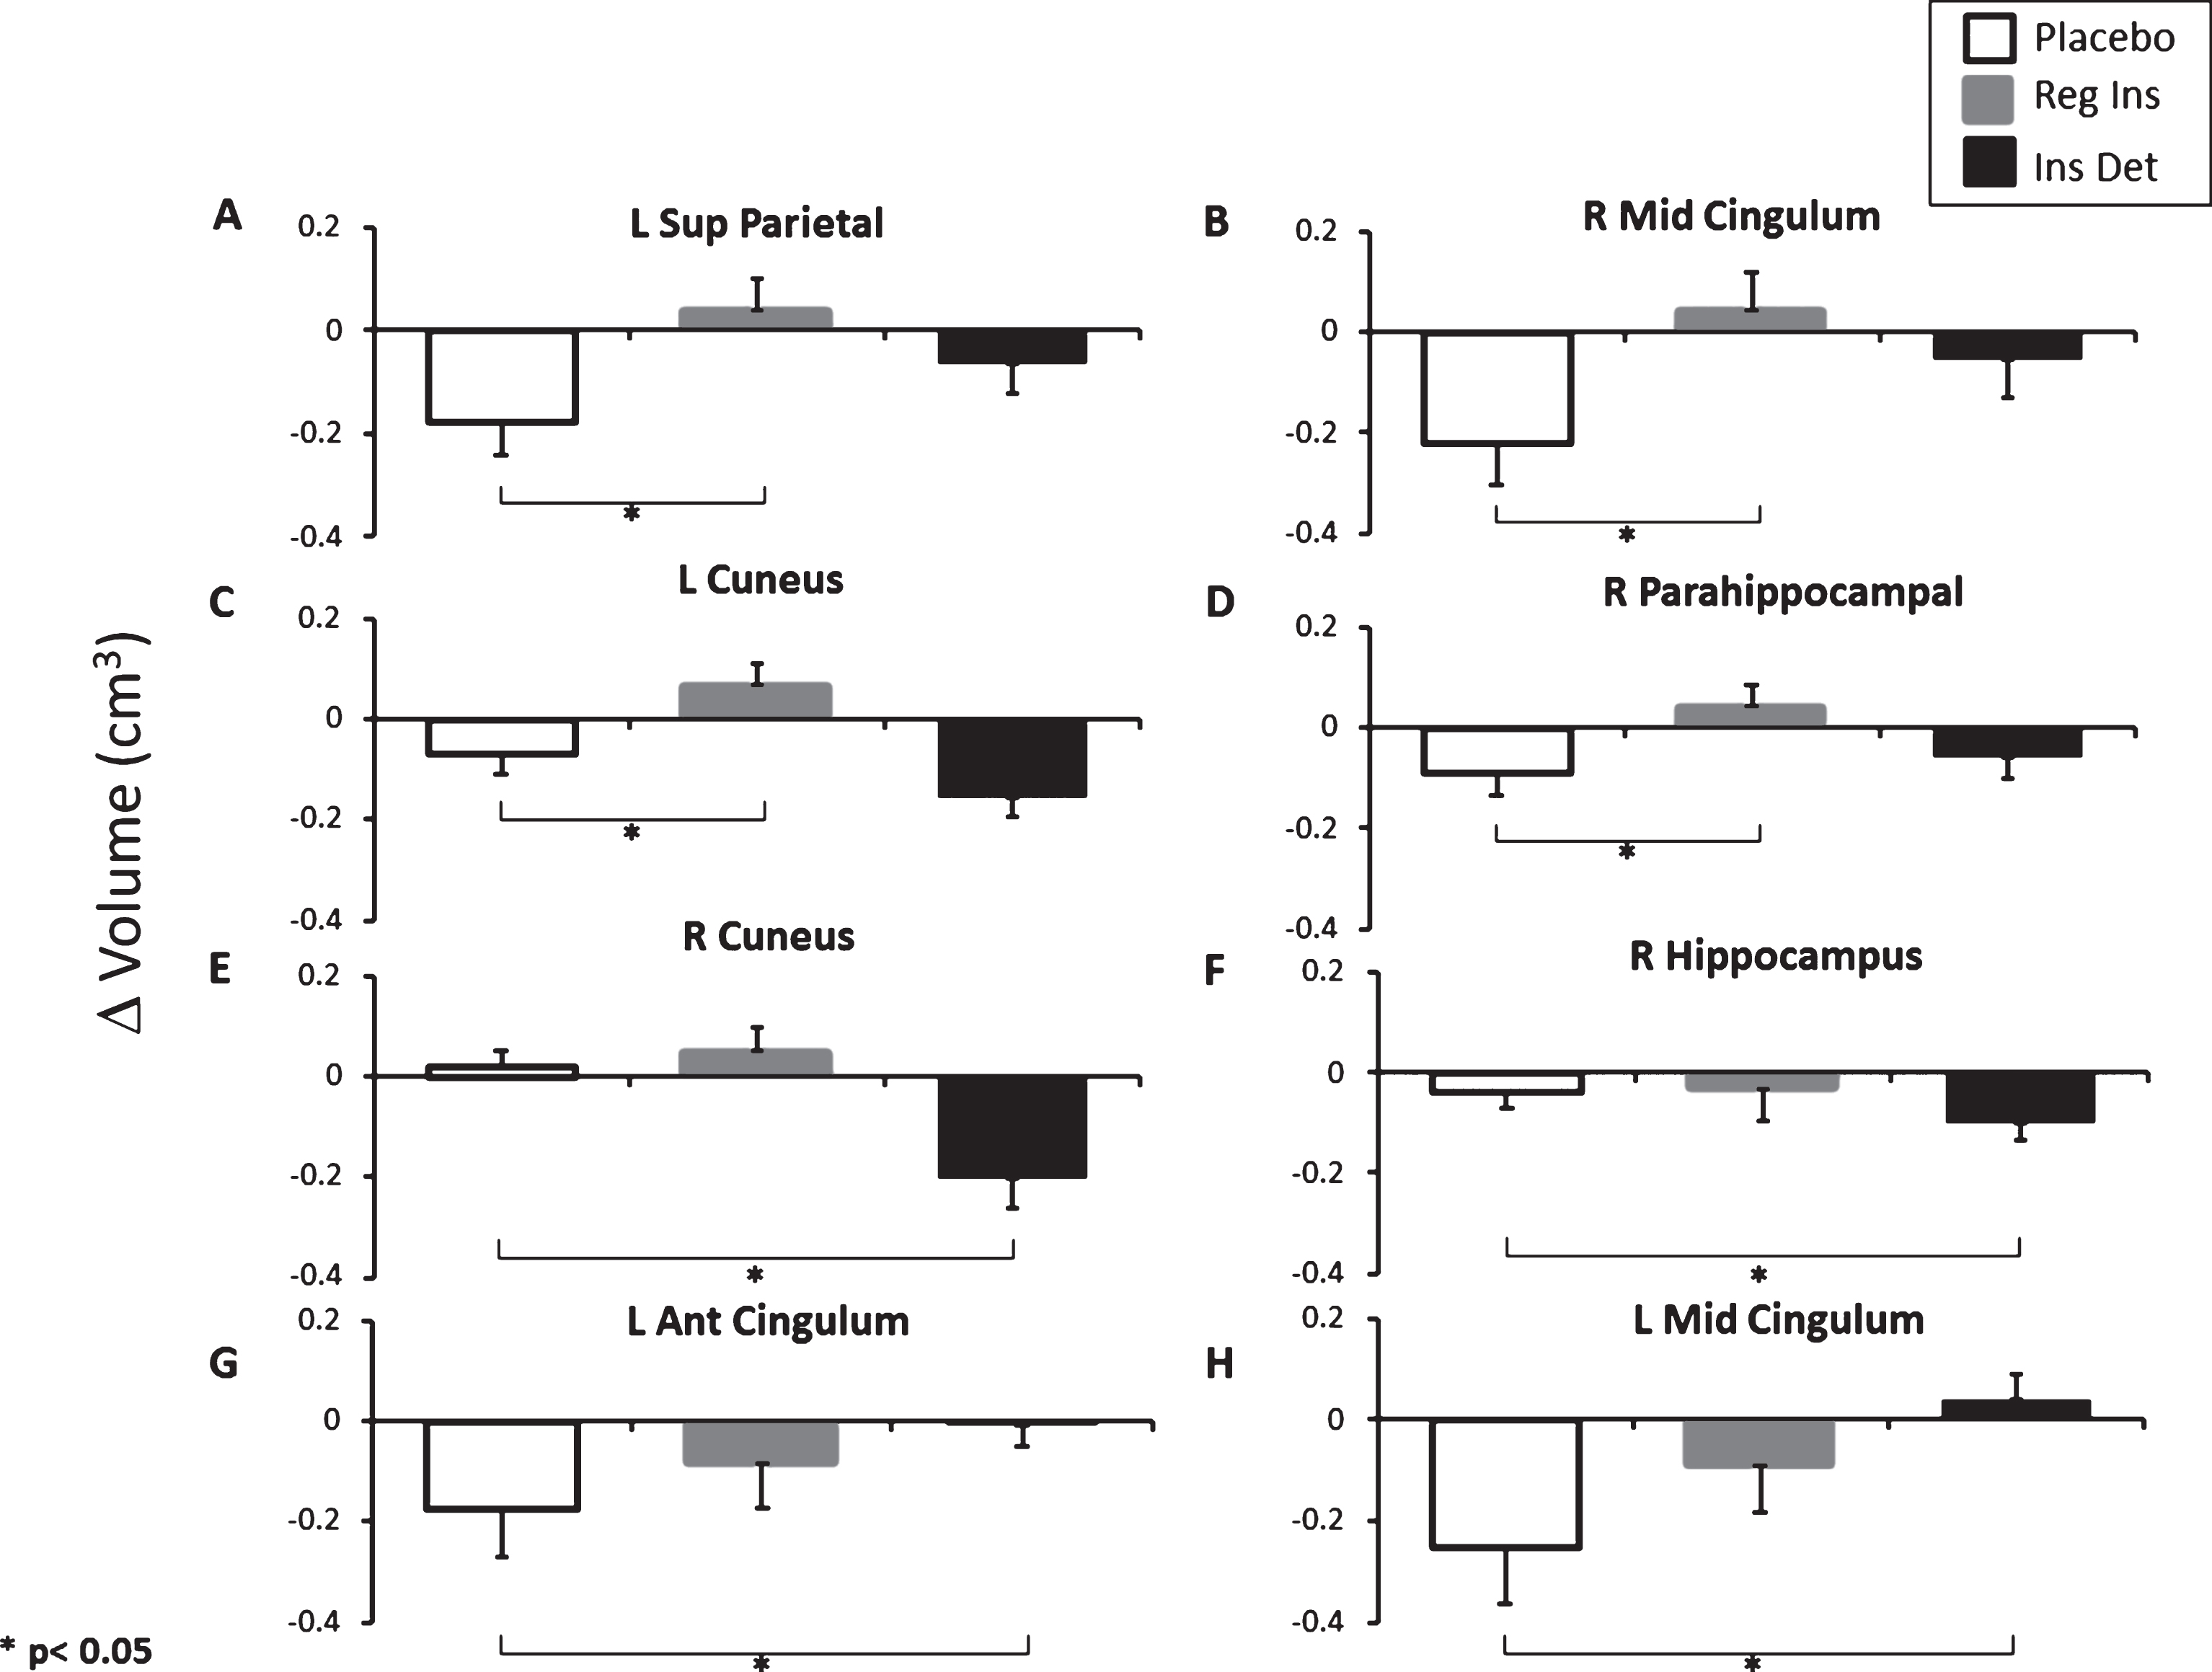 Change from baseline volume (cm3) for key AD-related ROIs. Increased or preserved volumes were noted in four ROIs for the regular insulin-treated group compared with the placebo group: (A) left superior parietal cortex; (B) right middle cingulum; (C) left cuneus; (D) right parahippocampal gyrus (all ps < 0.05). Decreased volume was observed for the detemir group relative to placebo for (E) right cuneus and (F) right hippocampus (ps < 0.01 and 0.05), whereas preserved volume was observed for (G) left anterior cingulum and (H) left middle cingulum (ps < 0.05).